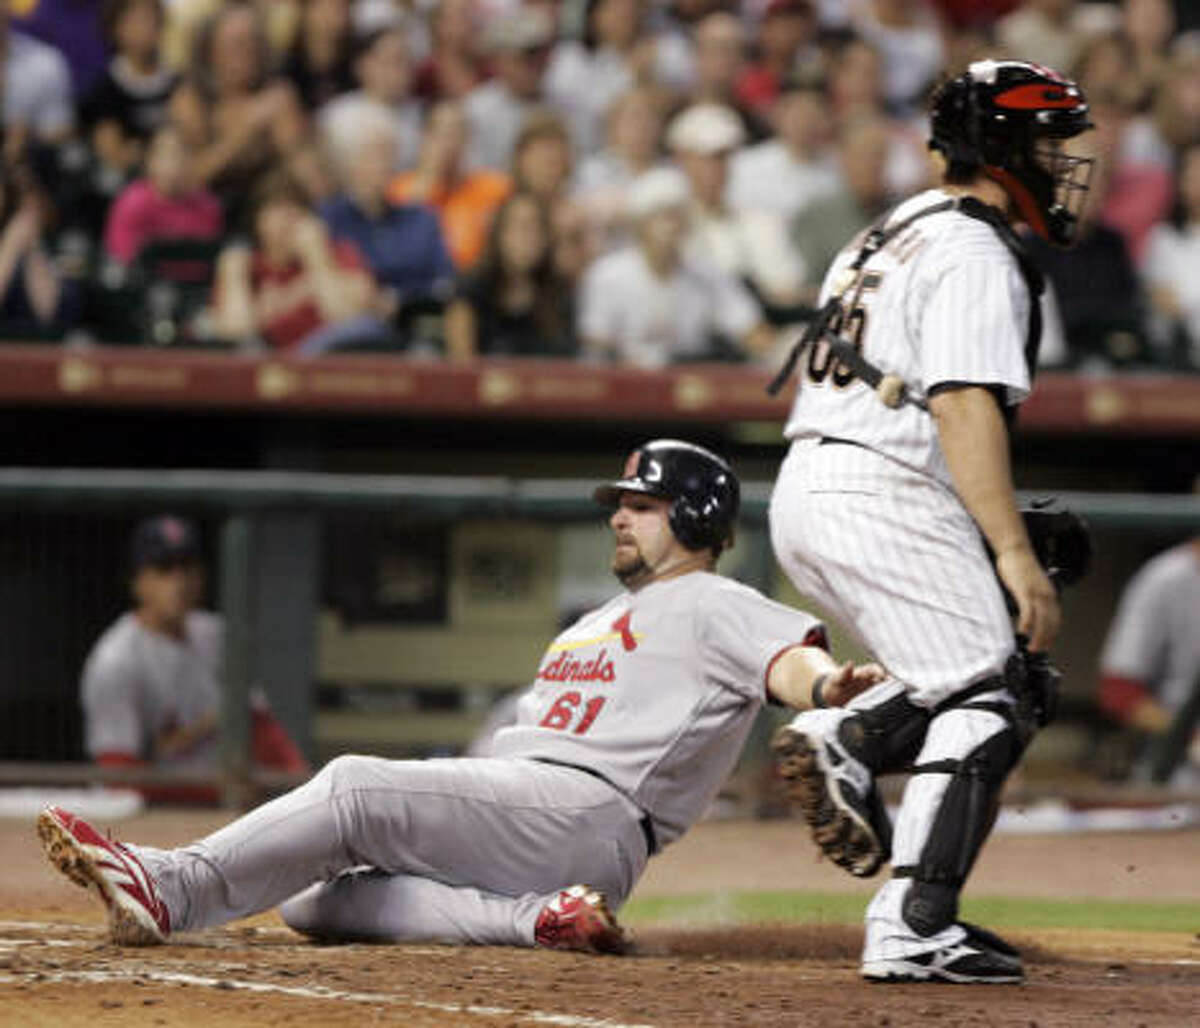 St. Louis's Nick Stavinoha, left, slides into home plate behind Houston Astros catcher Humberto Quintero (55) to score from third base on Ryan Ludwick's sacrifice fly to left field in the sixth inning.